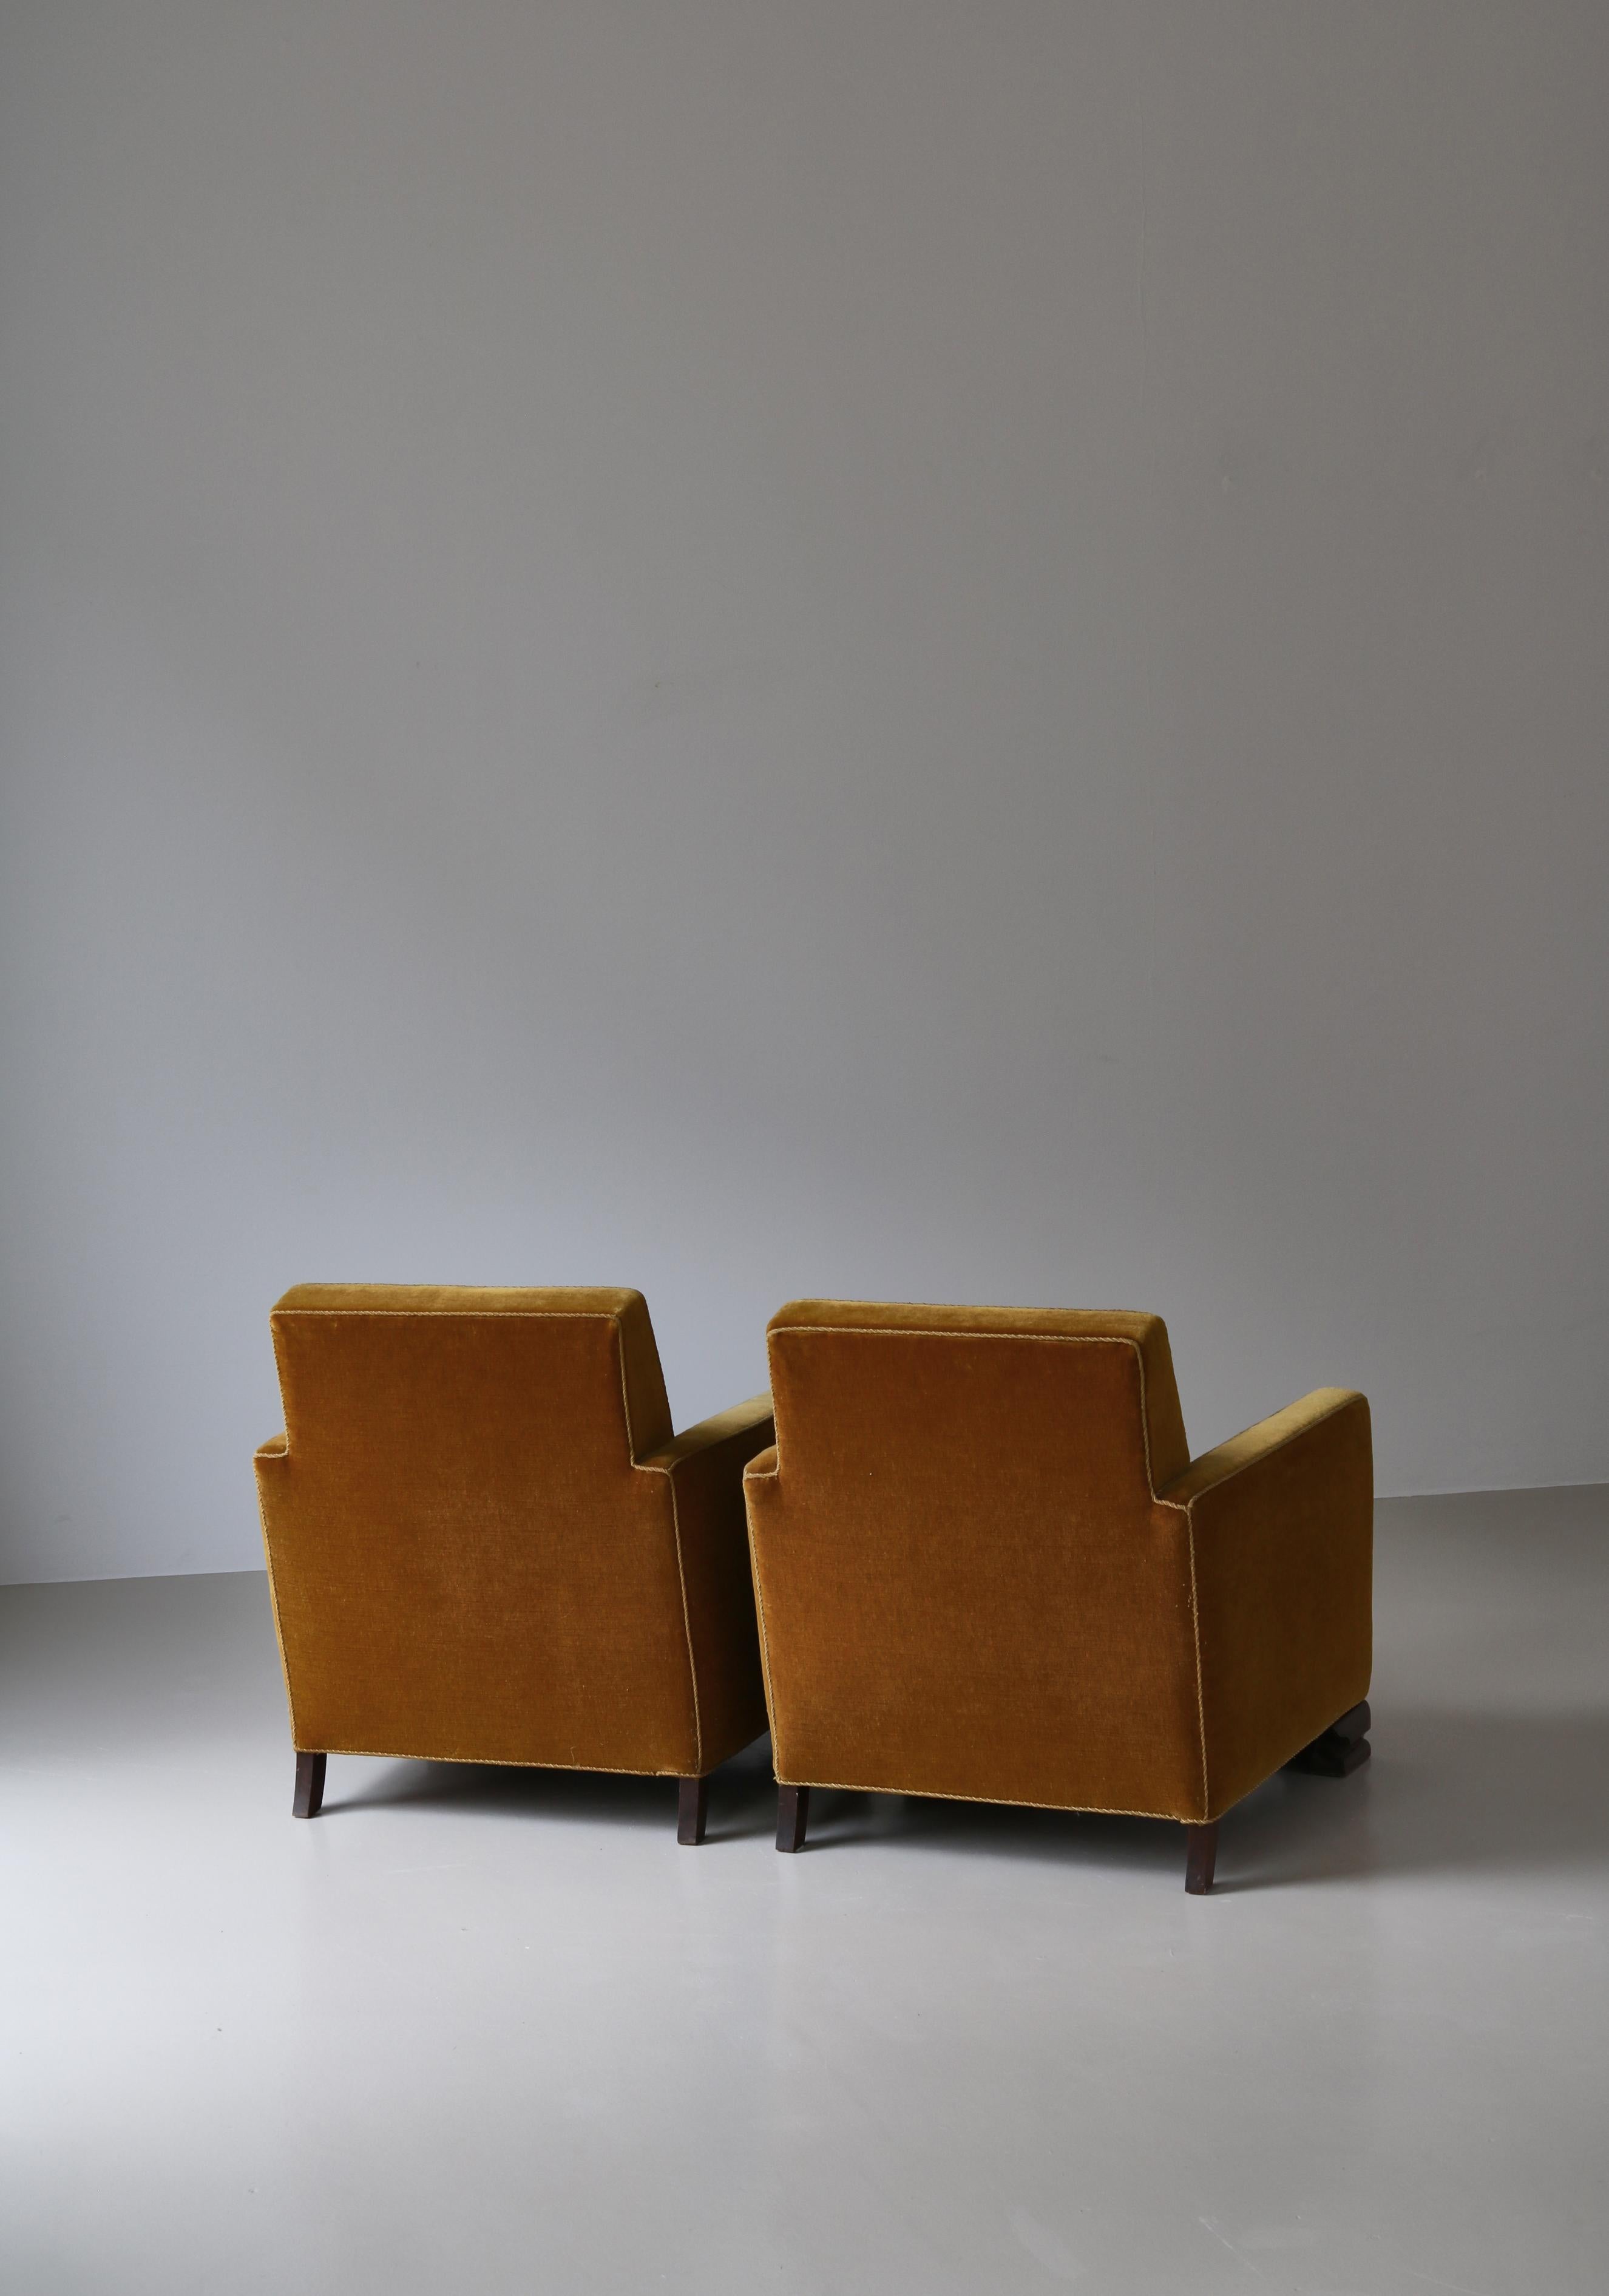 Mid-20th Century Pair of Danish Cabinetmaker Art Deco Lounge Chairs in Yellow Mohair, 1930s For Sale